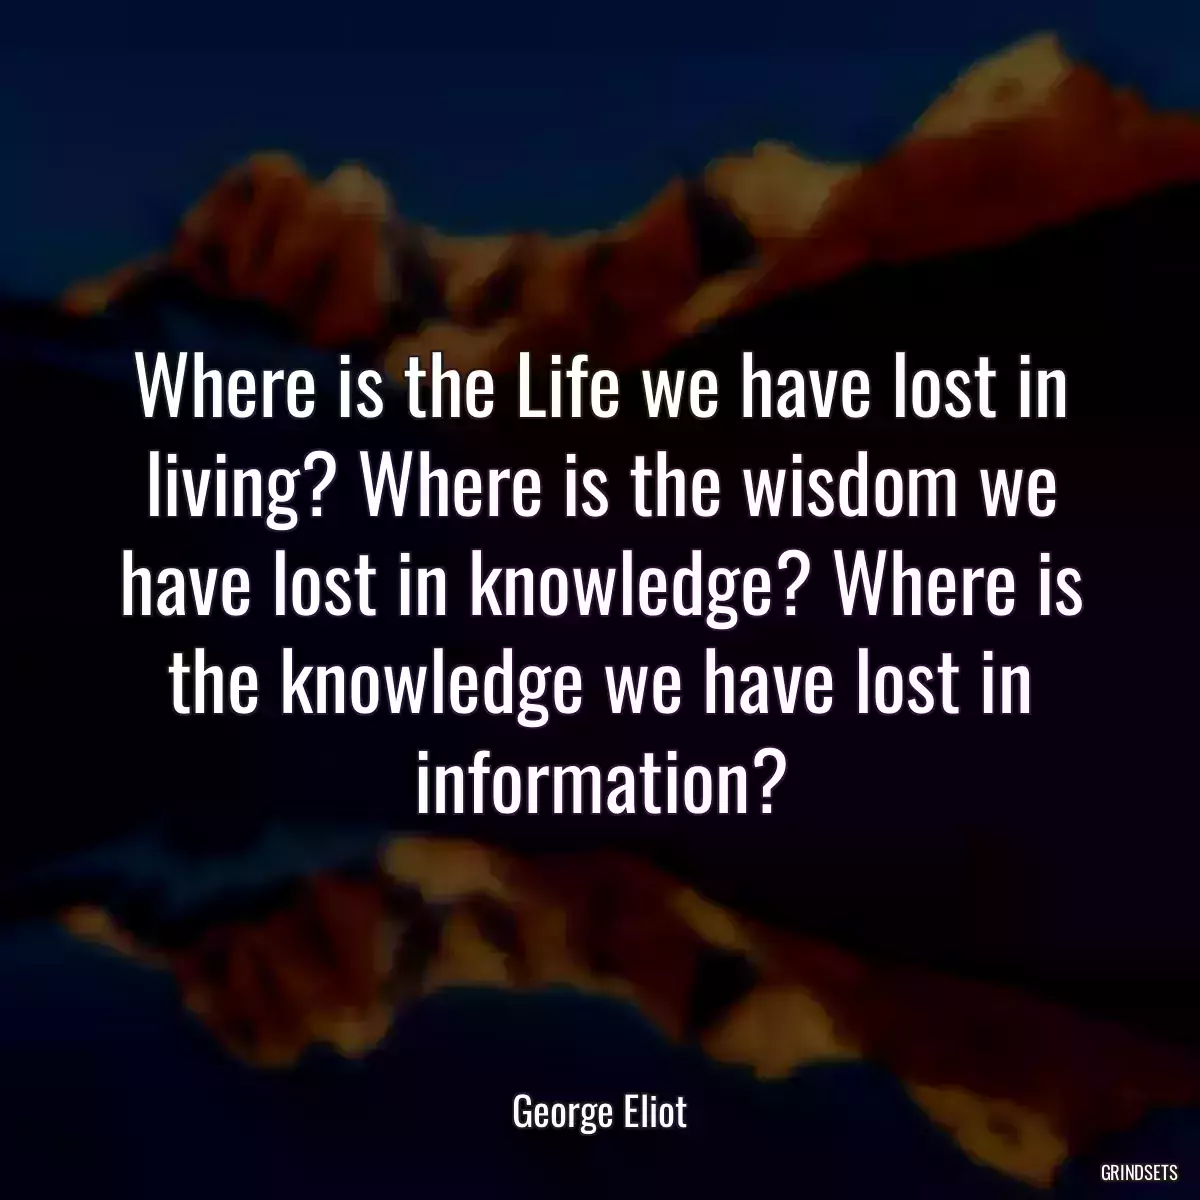 Where is the Life we have lost in living? Where is the wisdom we have lost in knowledge? Where is the knowledge we have lost in information?